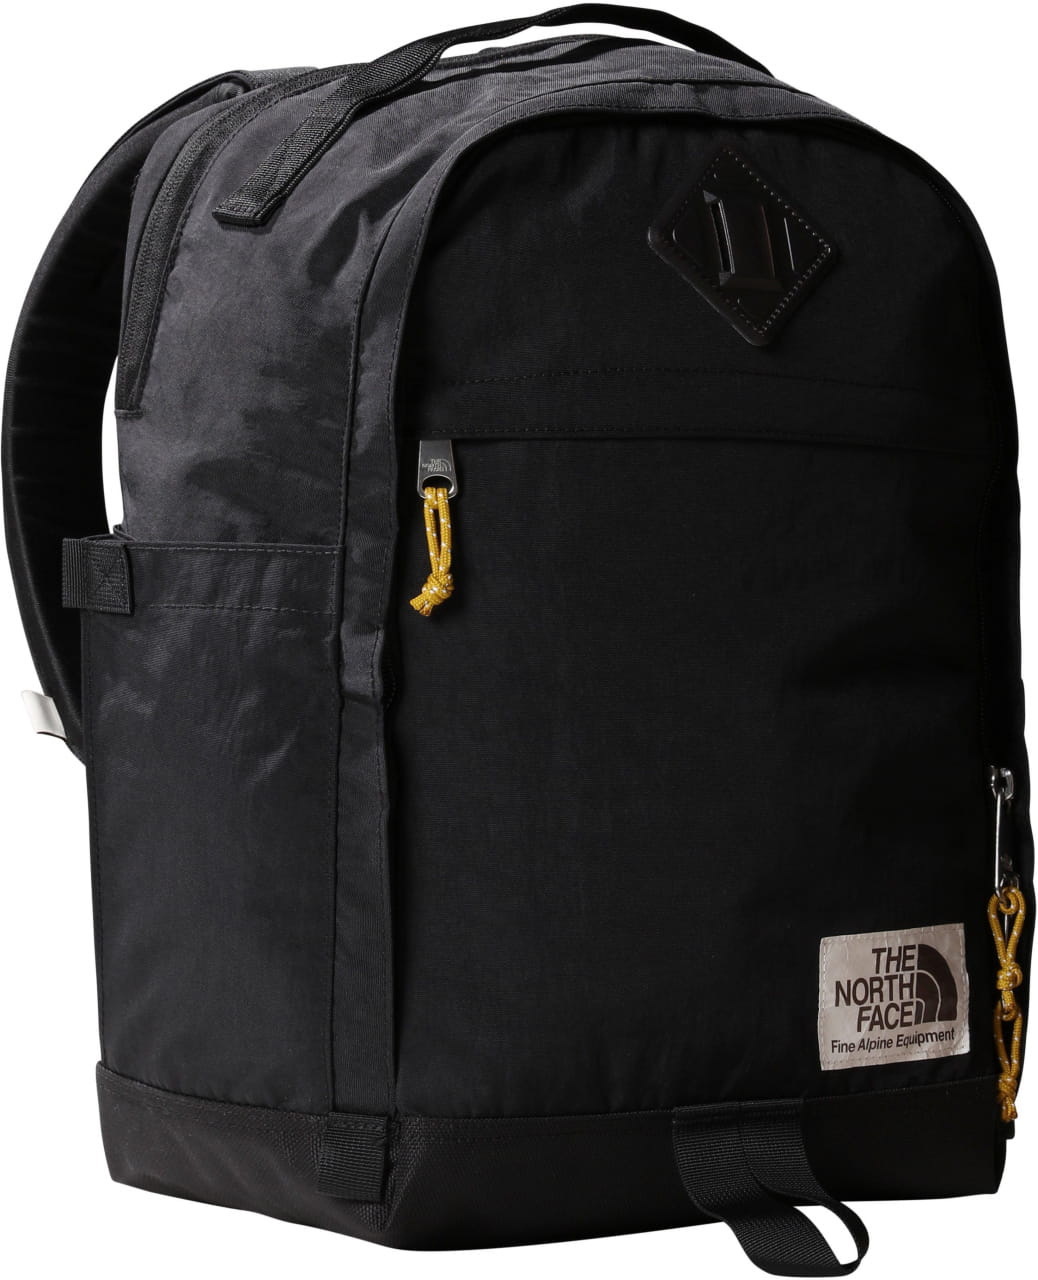 Rucsac sport unisex The North Face Berkeley Daypack